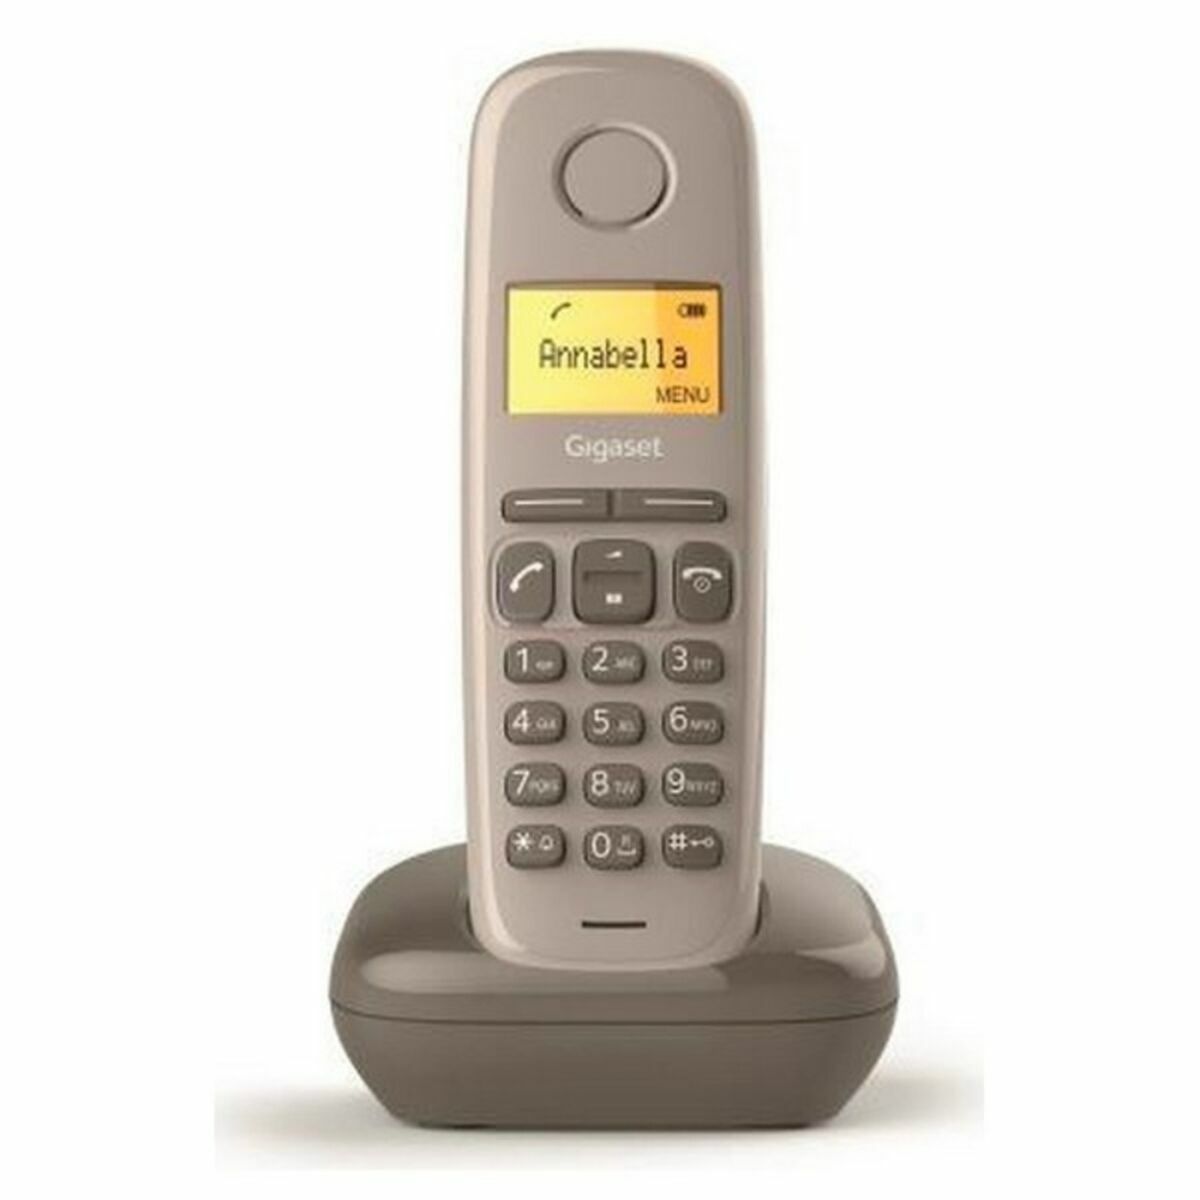 Wireless Phone Gigaset A170 Wireless 1,5", Gigaset, Electronics, Landline telephones and accessories, wireless-phone-gigaset-a170-wireless-1-6, Brand_Gigaset, category-reference-2609, category-reference-2617, category-reference-2619, category-reference-t-18372, category-reference-t-19653, Colour_Black, Colour_Blue, Colour_Green, Colour_Red, Colour_White, Colour_Čokoladna, Condition_NEW, office, Price_20 - 50, telephones & tablets, Teleworking, RiotNook